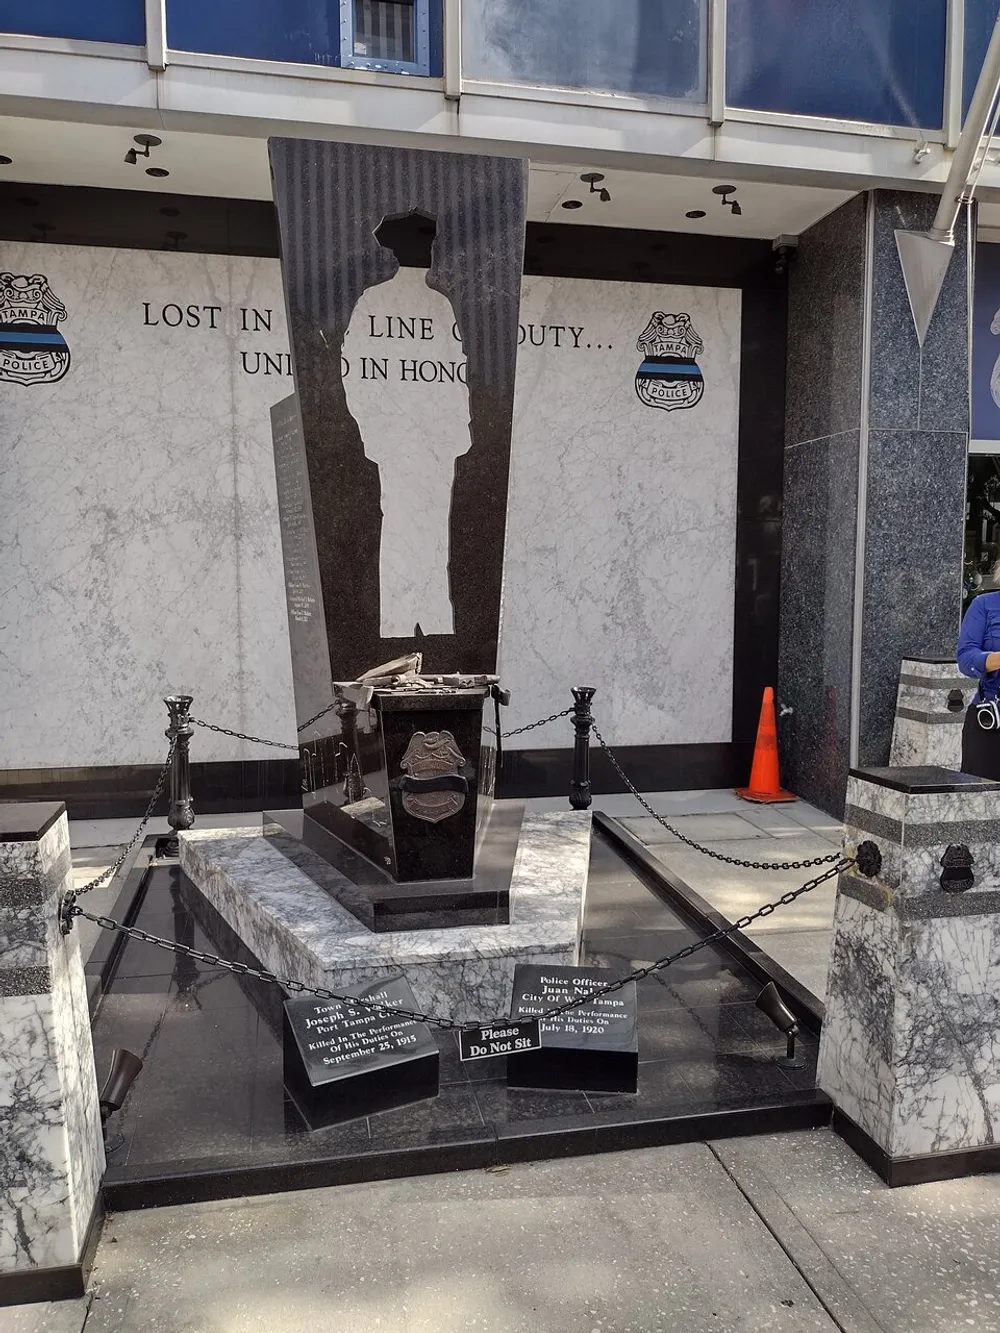 This image shows a solemn memorial for fallen police officers featuring a black stone monument with an engraved silhouette inscriptions and adorned with commemorative plaques and a bronze hat and handcuffs set against a marbled backdrop with the inscription LOST IN LINE OF DUTY UNITED IN HONOR